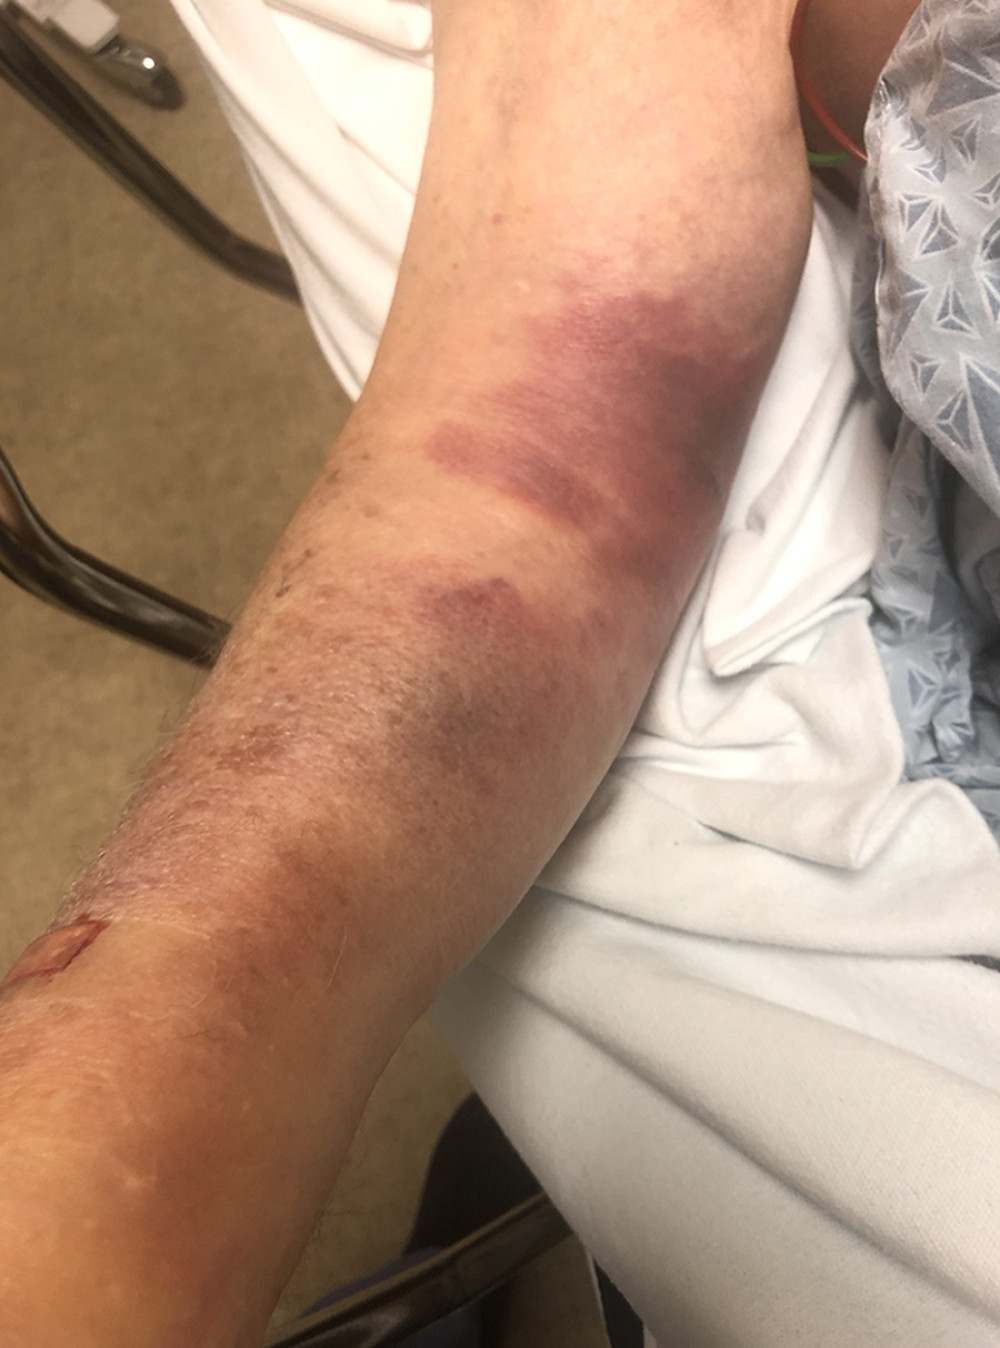 Bedside image of the patient’s right forearm taken in the Emergency Department revealing severe swelling and ecchymosis.